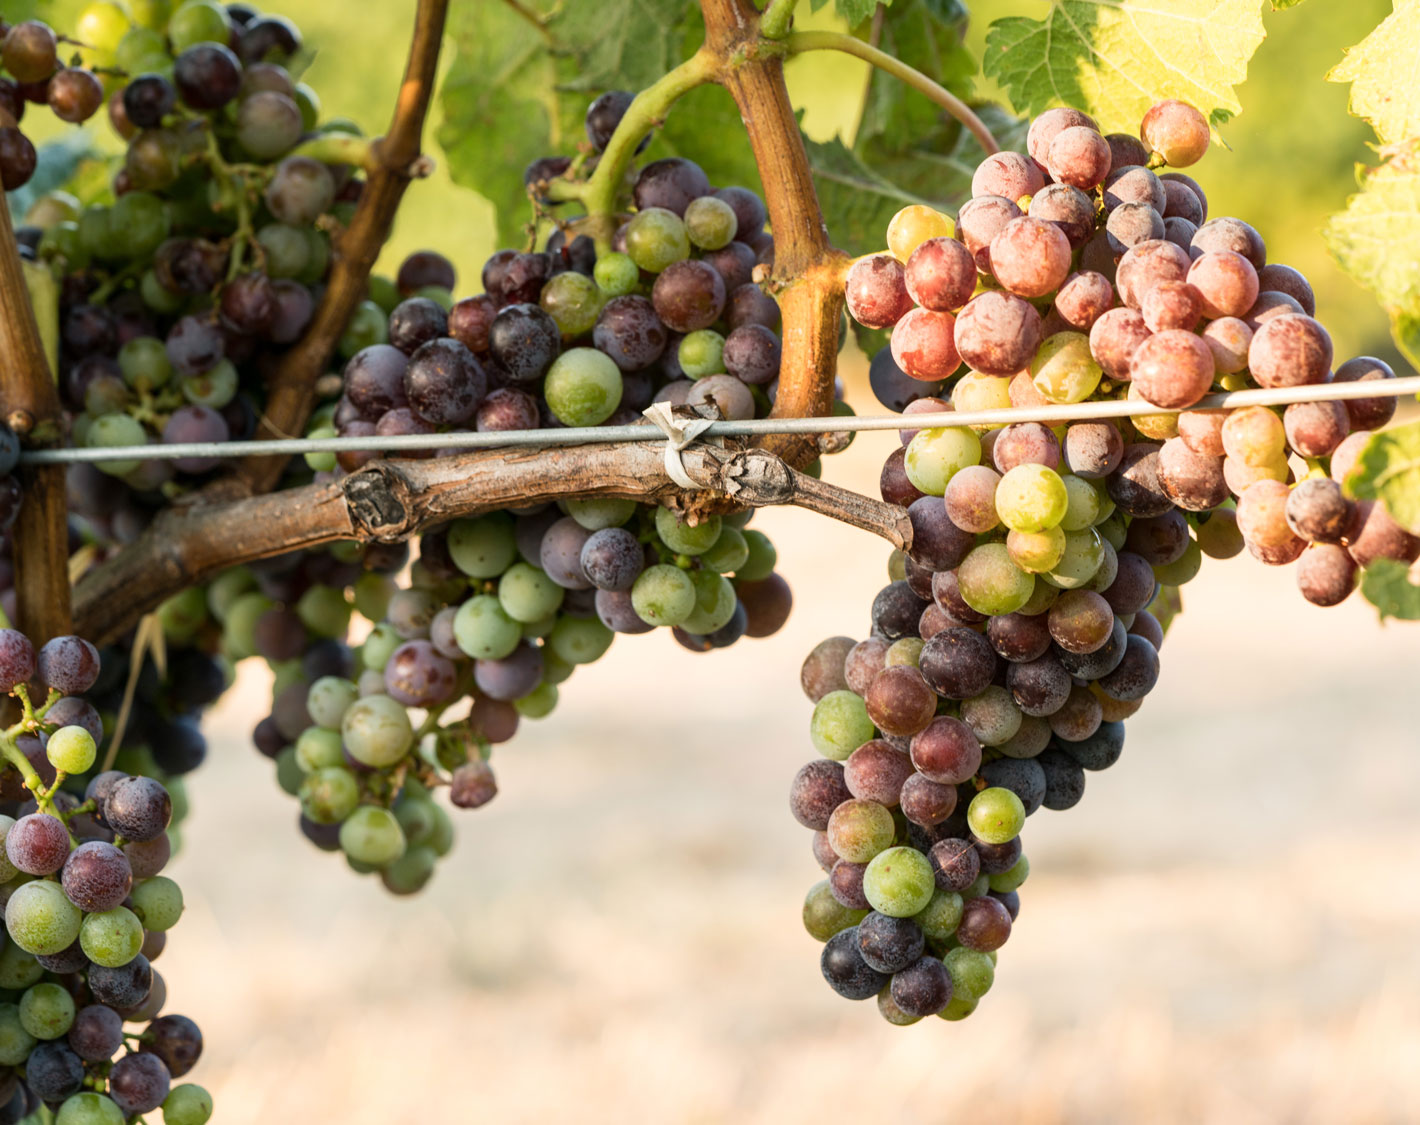 Veraison in the Cain Vineyard, photo by Mitch Rice